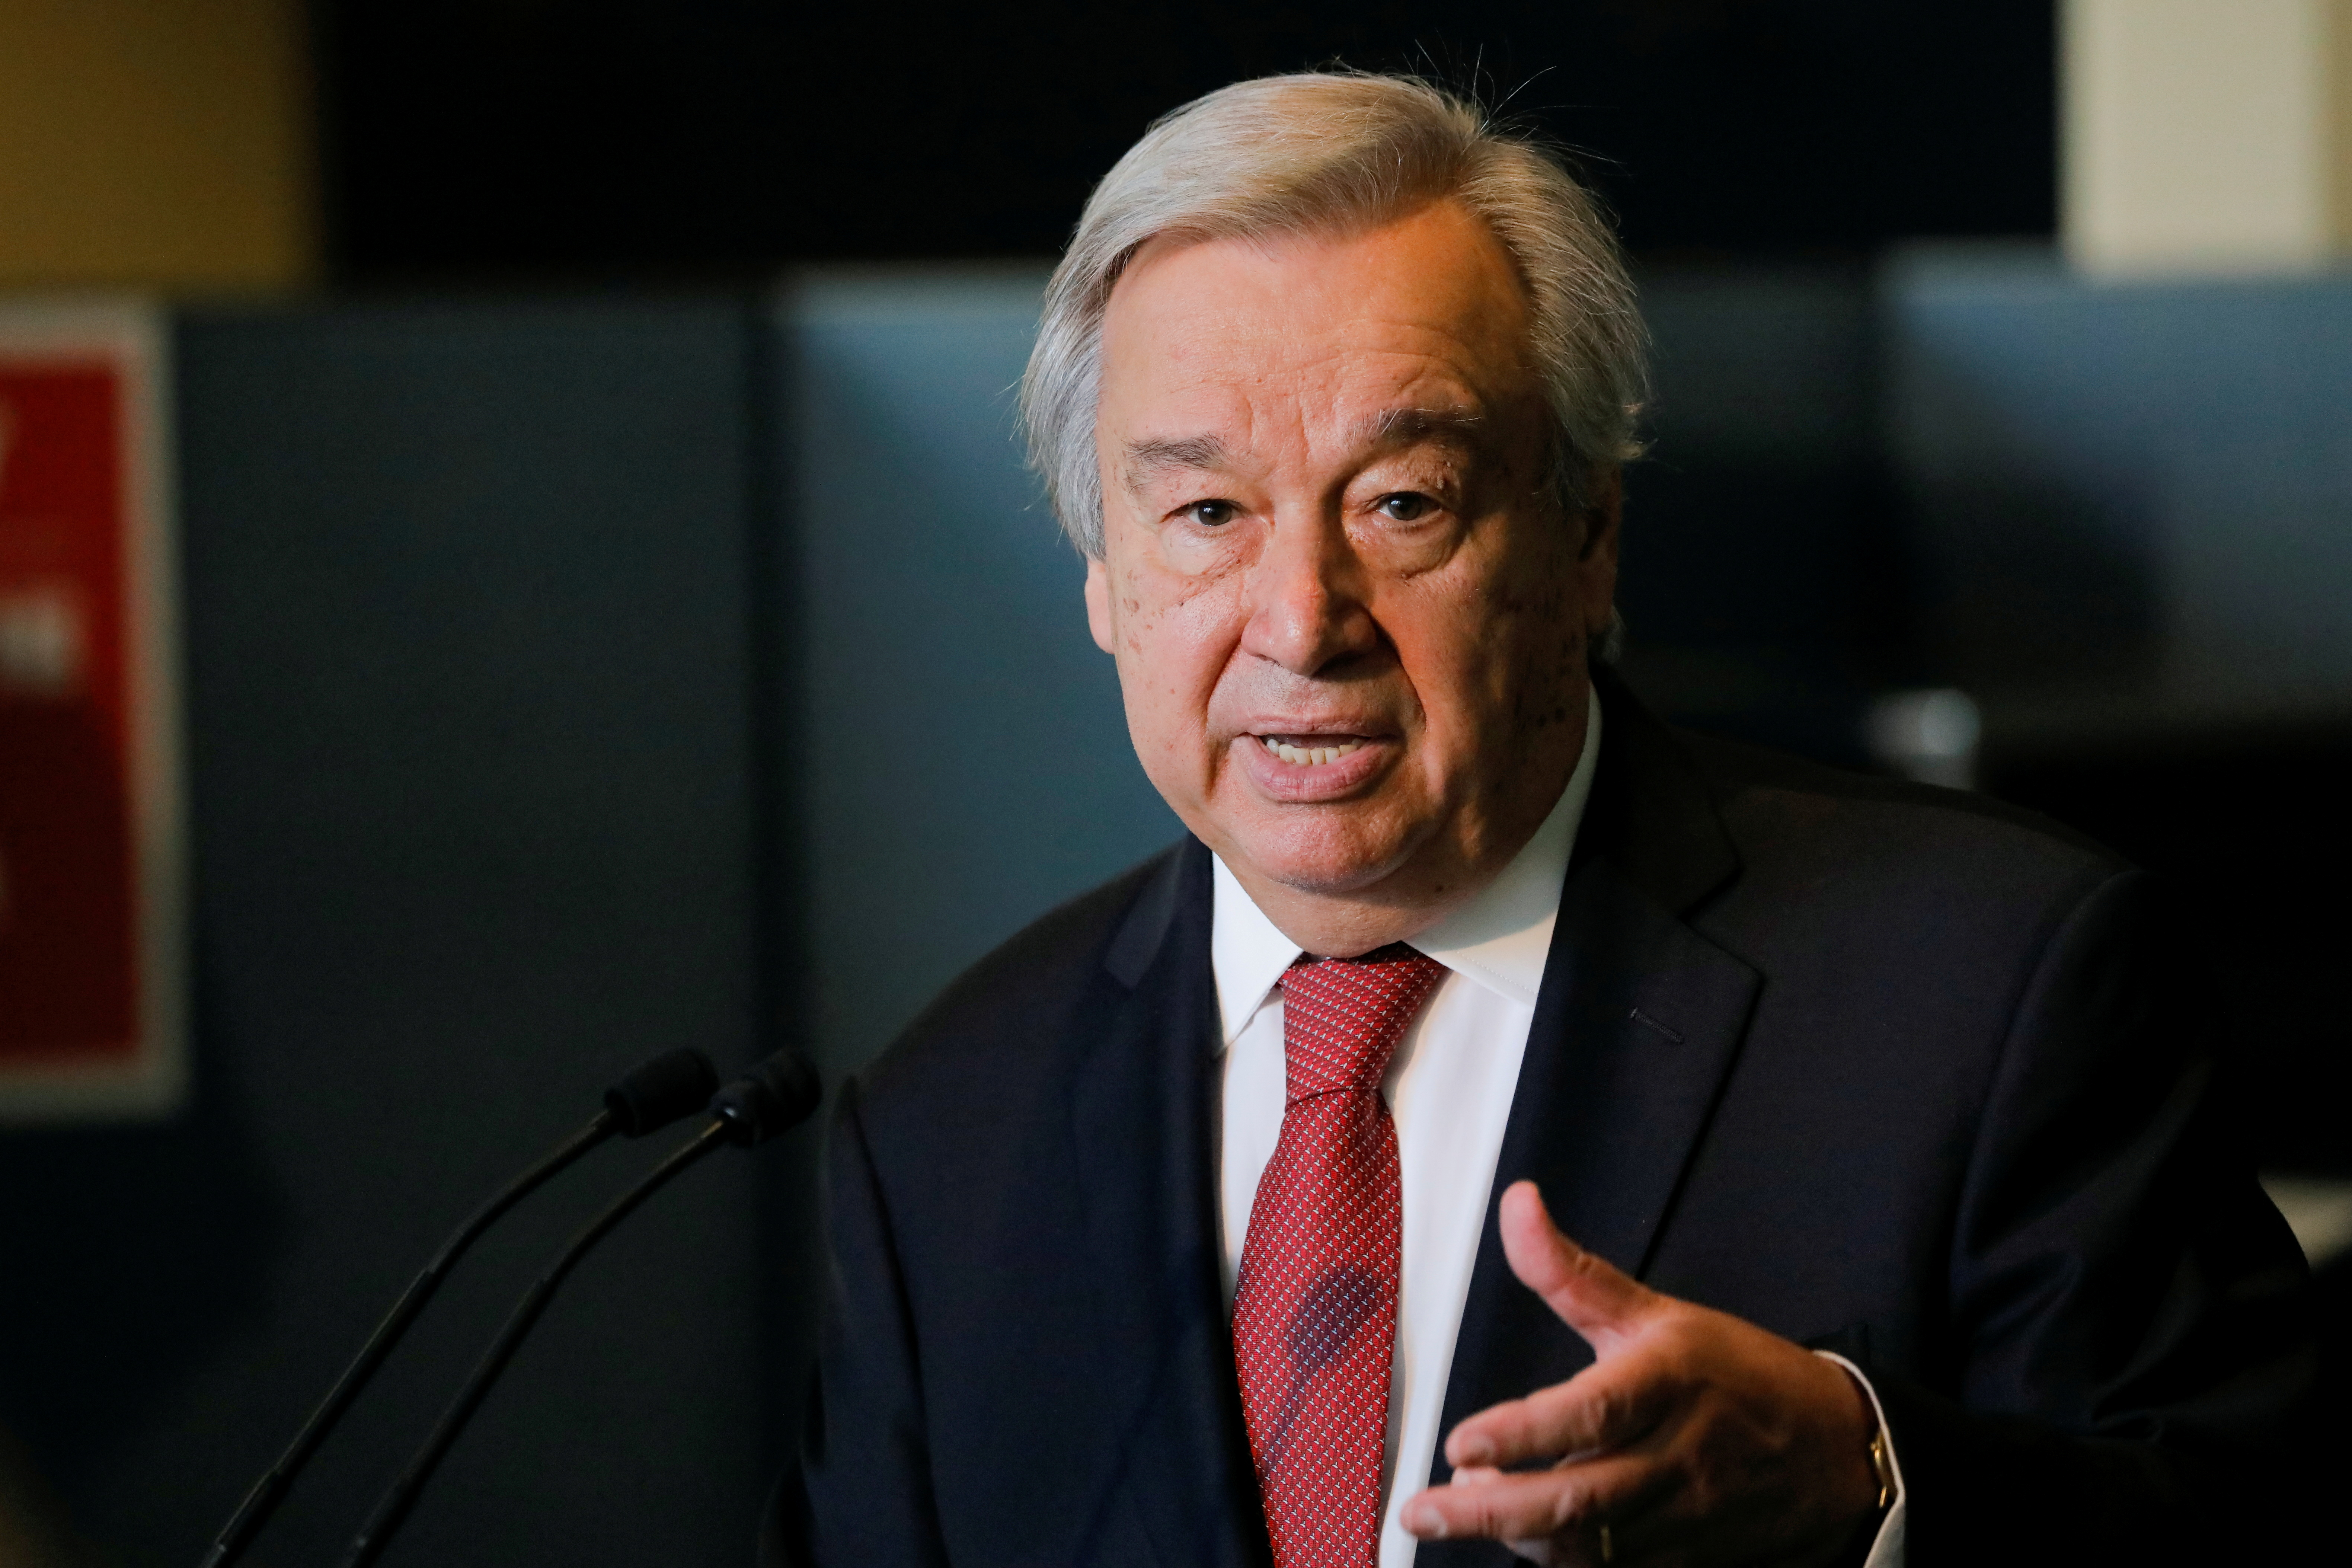 U.N. Secretary-General Antonio Guterres speaks as U.N. General Assembly appointed him for a second five-year term from January 1, 2022, in New York City